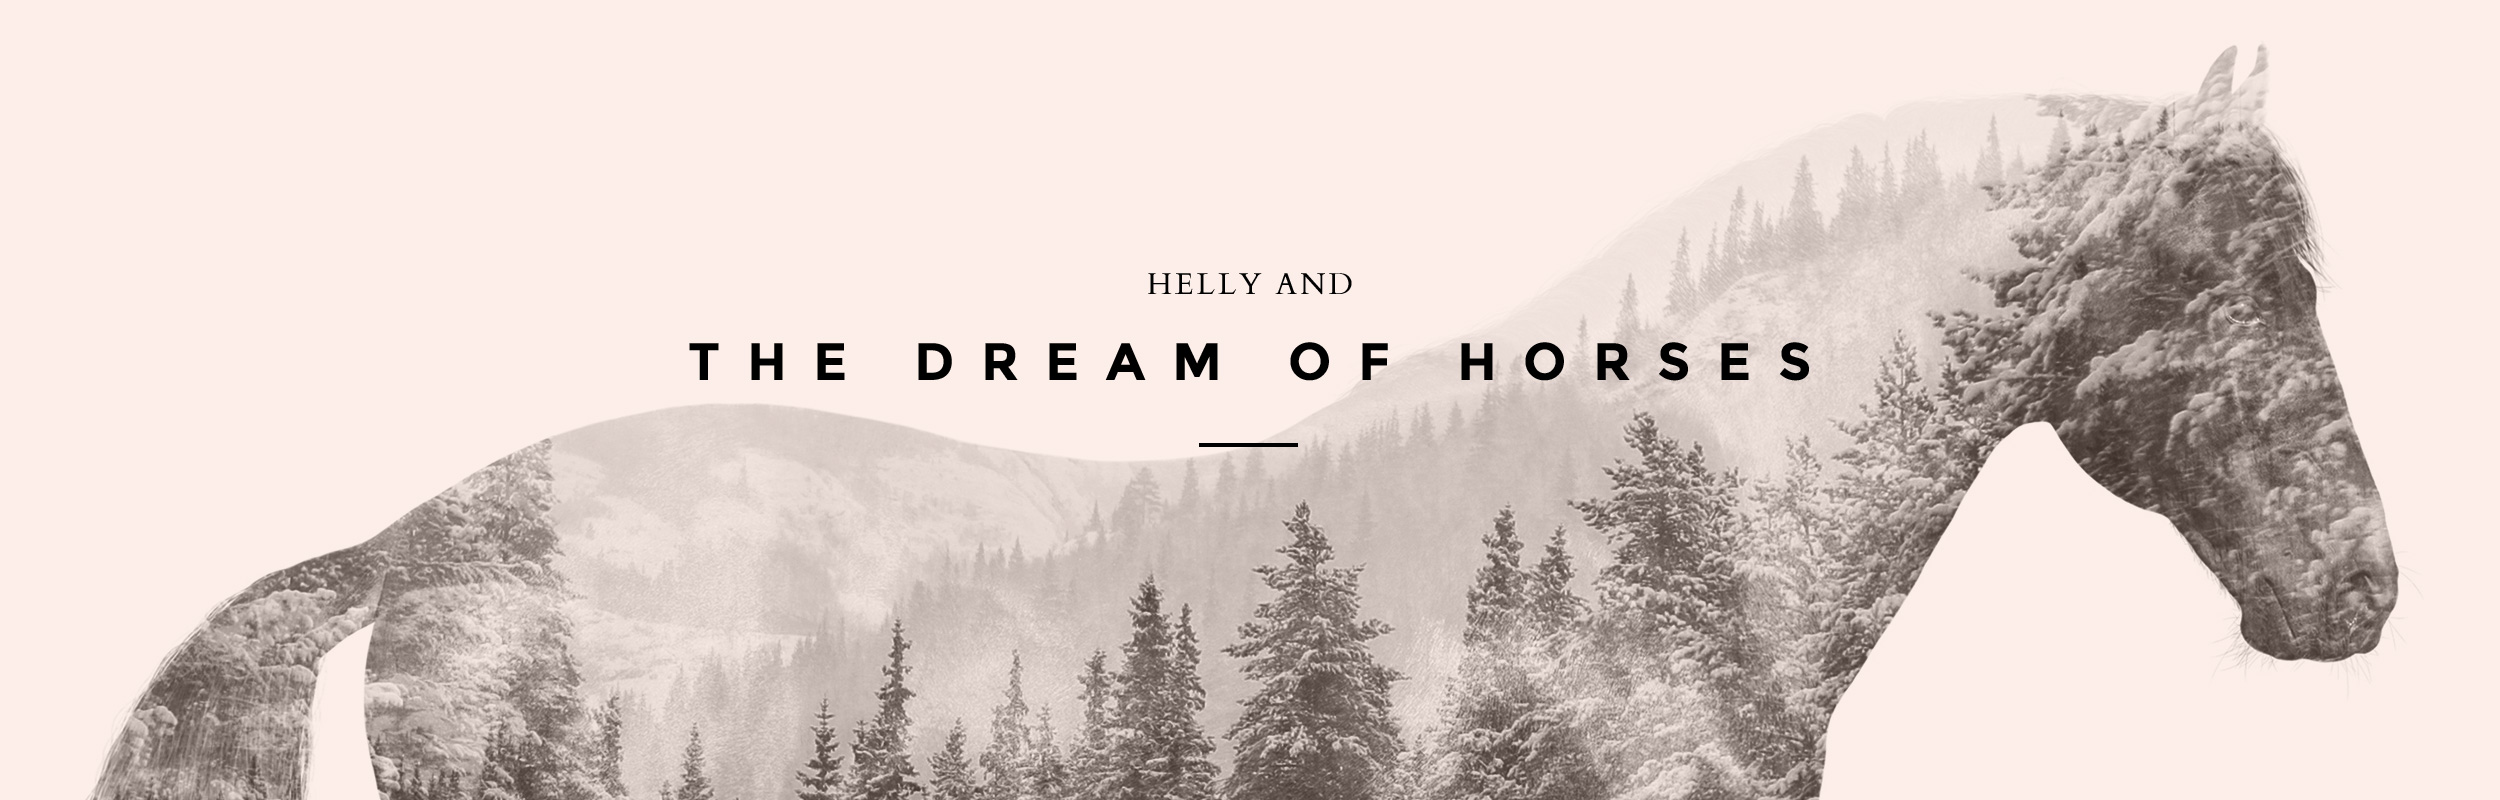 helly and the dream of horses